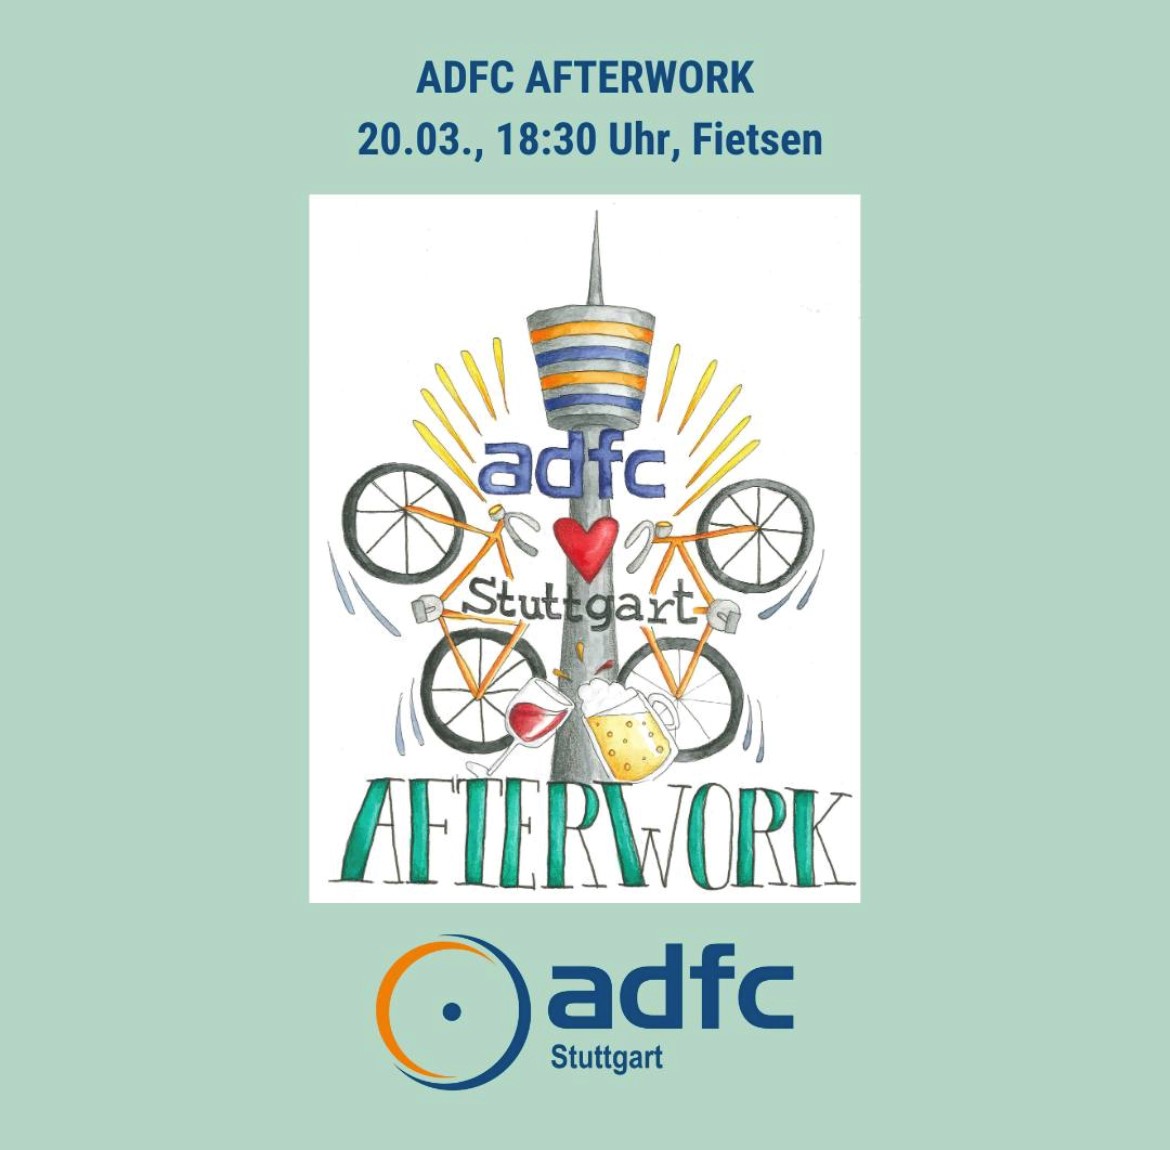 Afterwork of the ADFC Stuttgart (always on the 3rd Wednesday of the month)